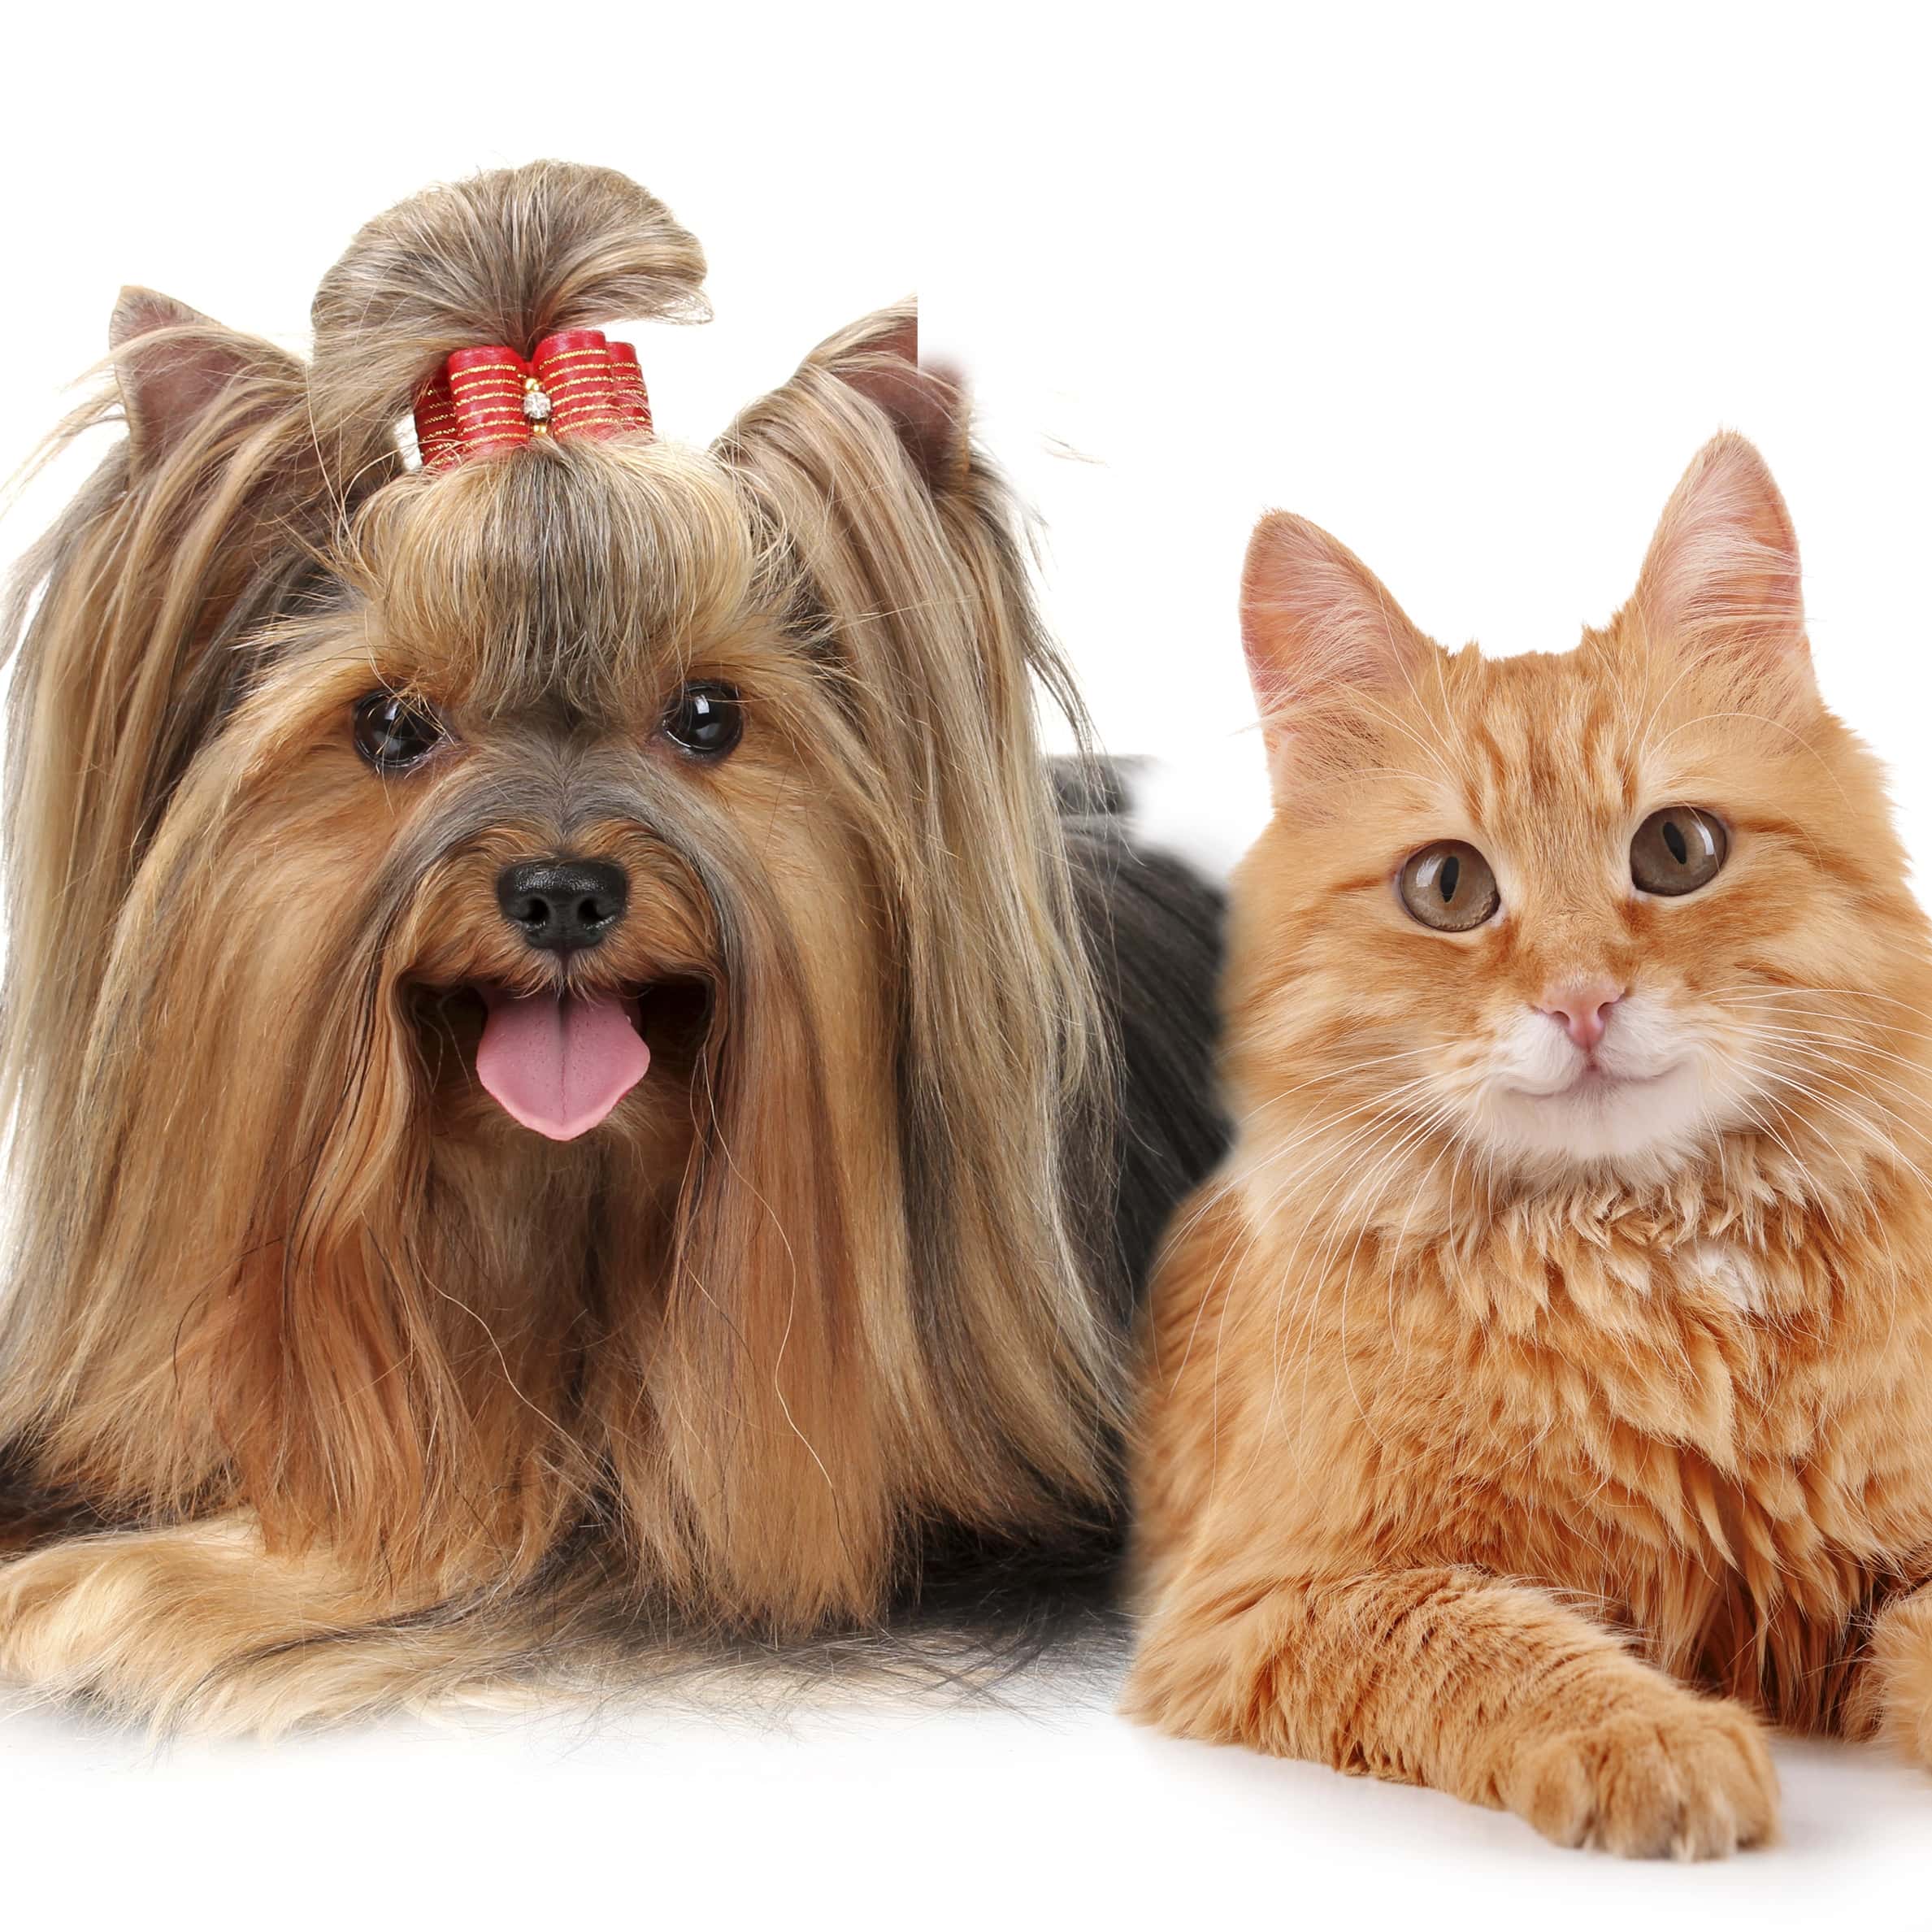 Little Munchkins Mobile Pet Grooming - Plano, TX, US, mobile dog grooming